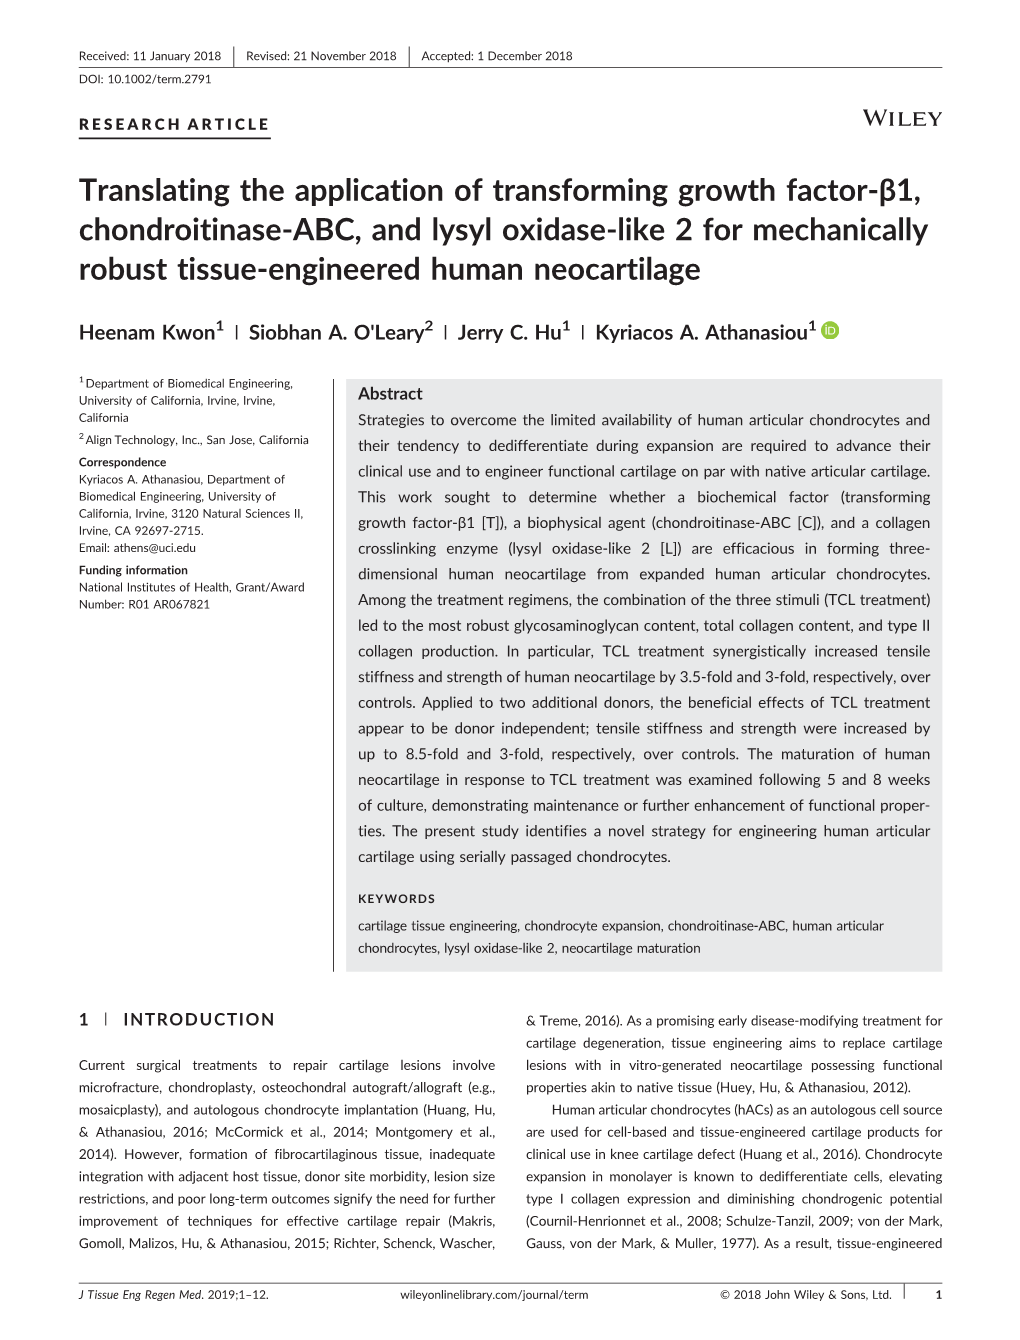 Translating the Application of Transforming Growth Factor-1, Chondroitinase-ABC, and Lysyl Oxidase-Like 2 for Mechanically Robus